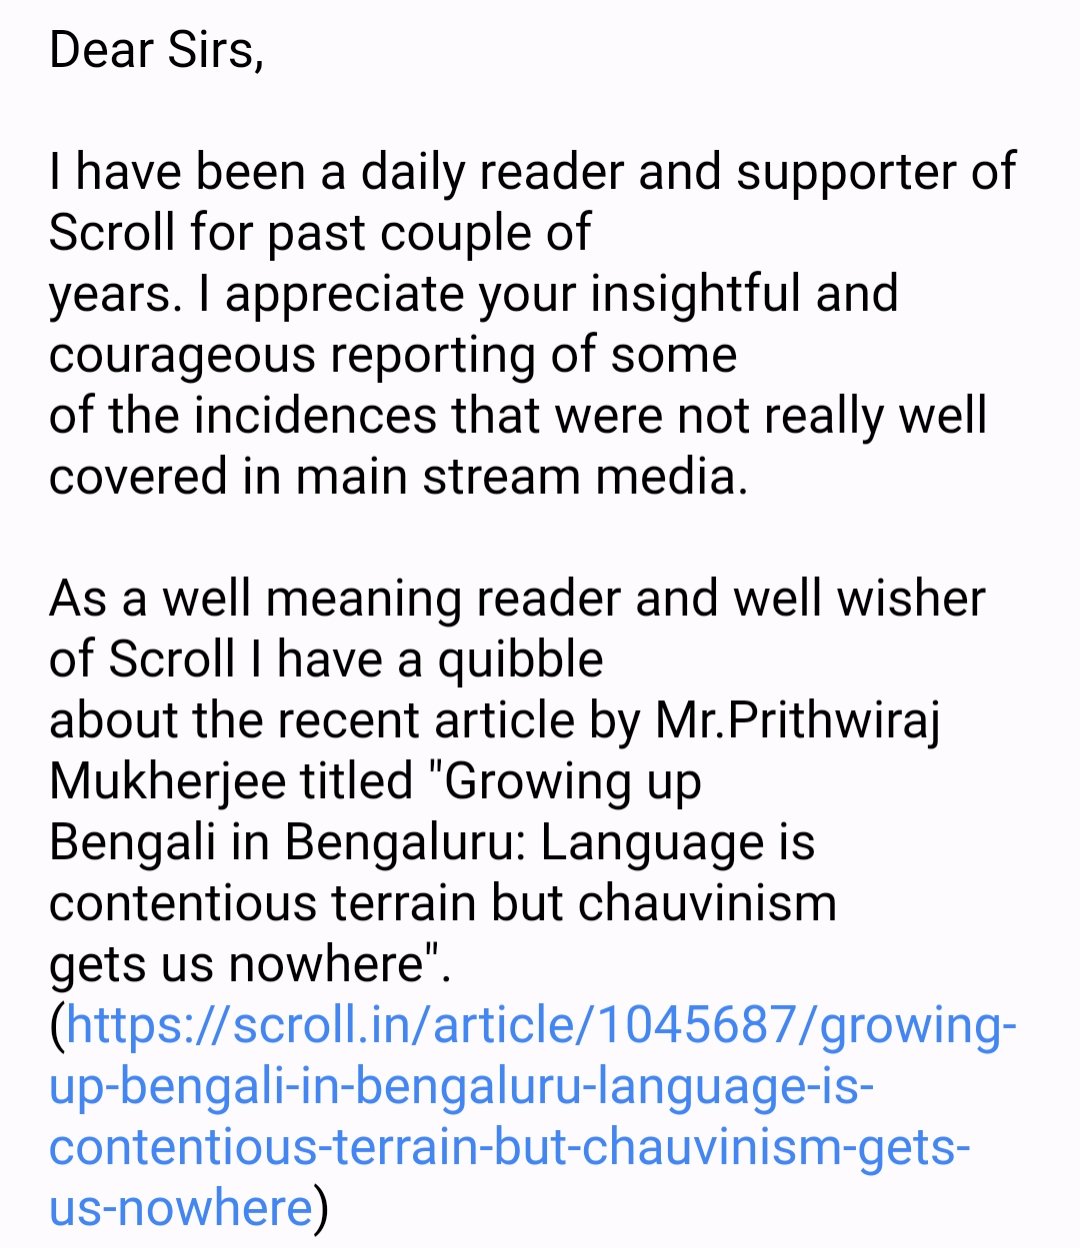 peeleraja on X: Thanks for writing in. Scroll is indeed admirable, which  is why i feel honored to have contributed here. On my part, i welcome  constructive criticism and diverse viewpoints. In